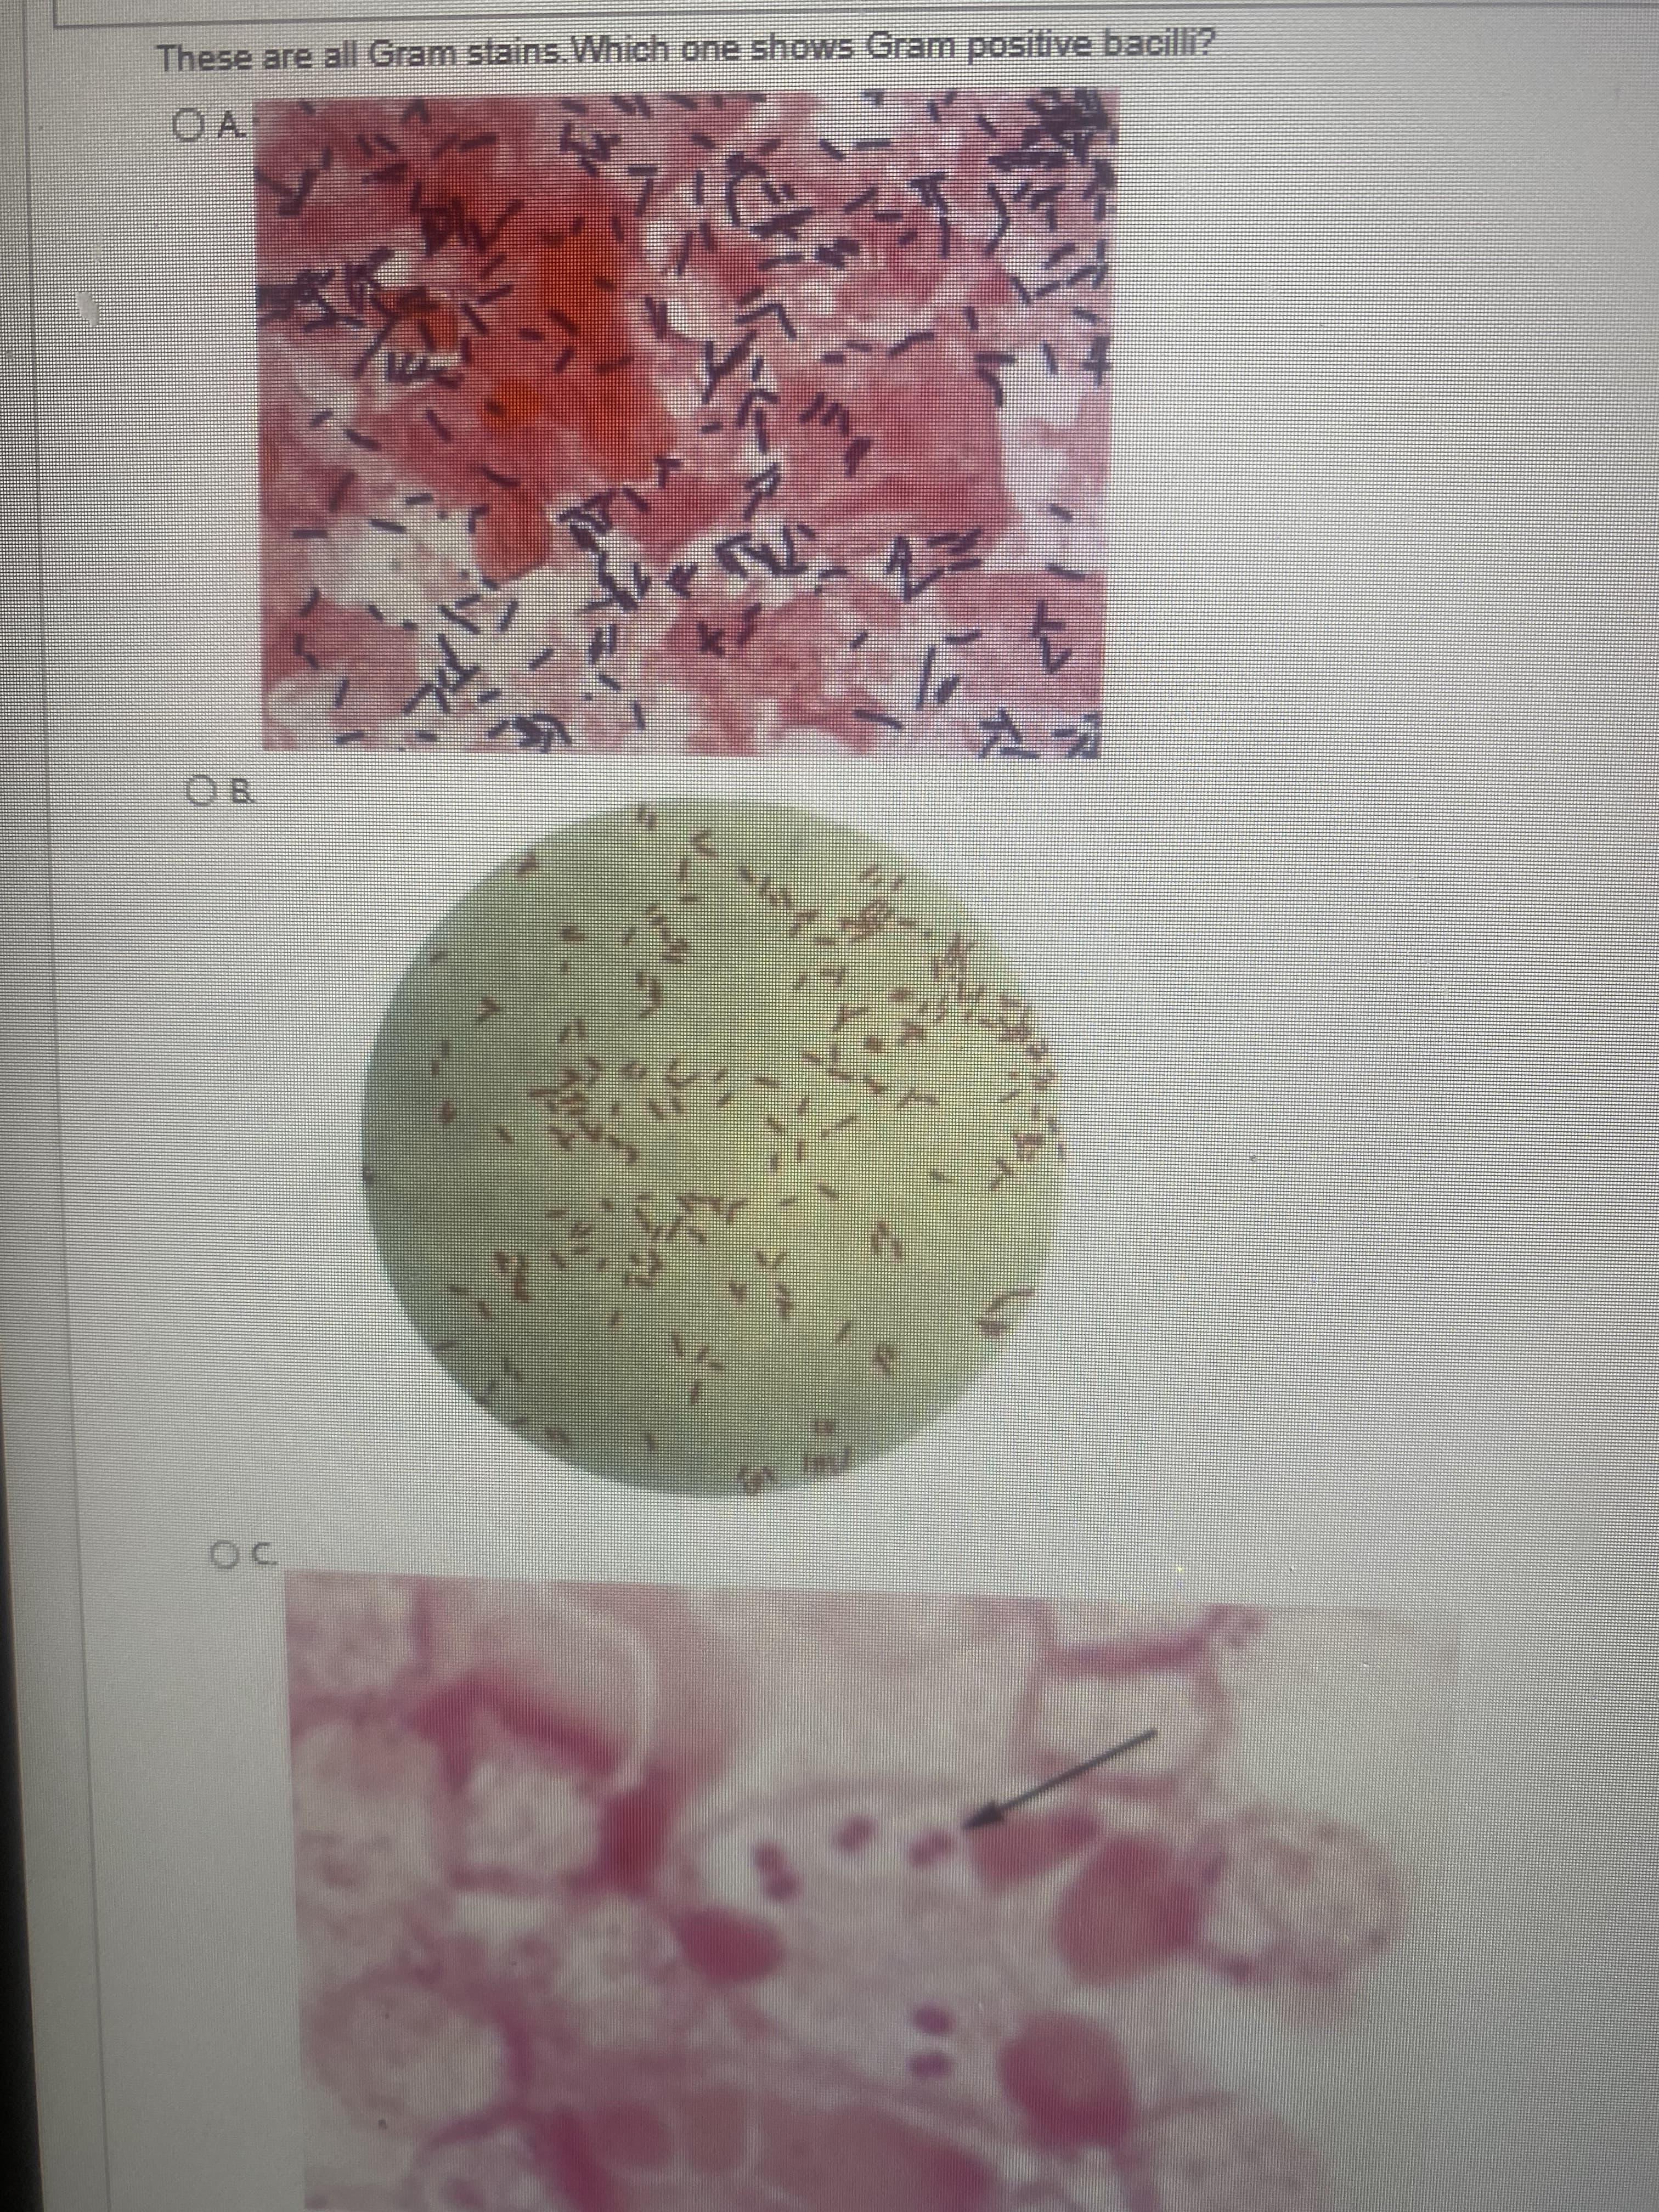 These are all Gram stains. Which one shows Gram positive bacilli2
OA
OB
